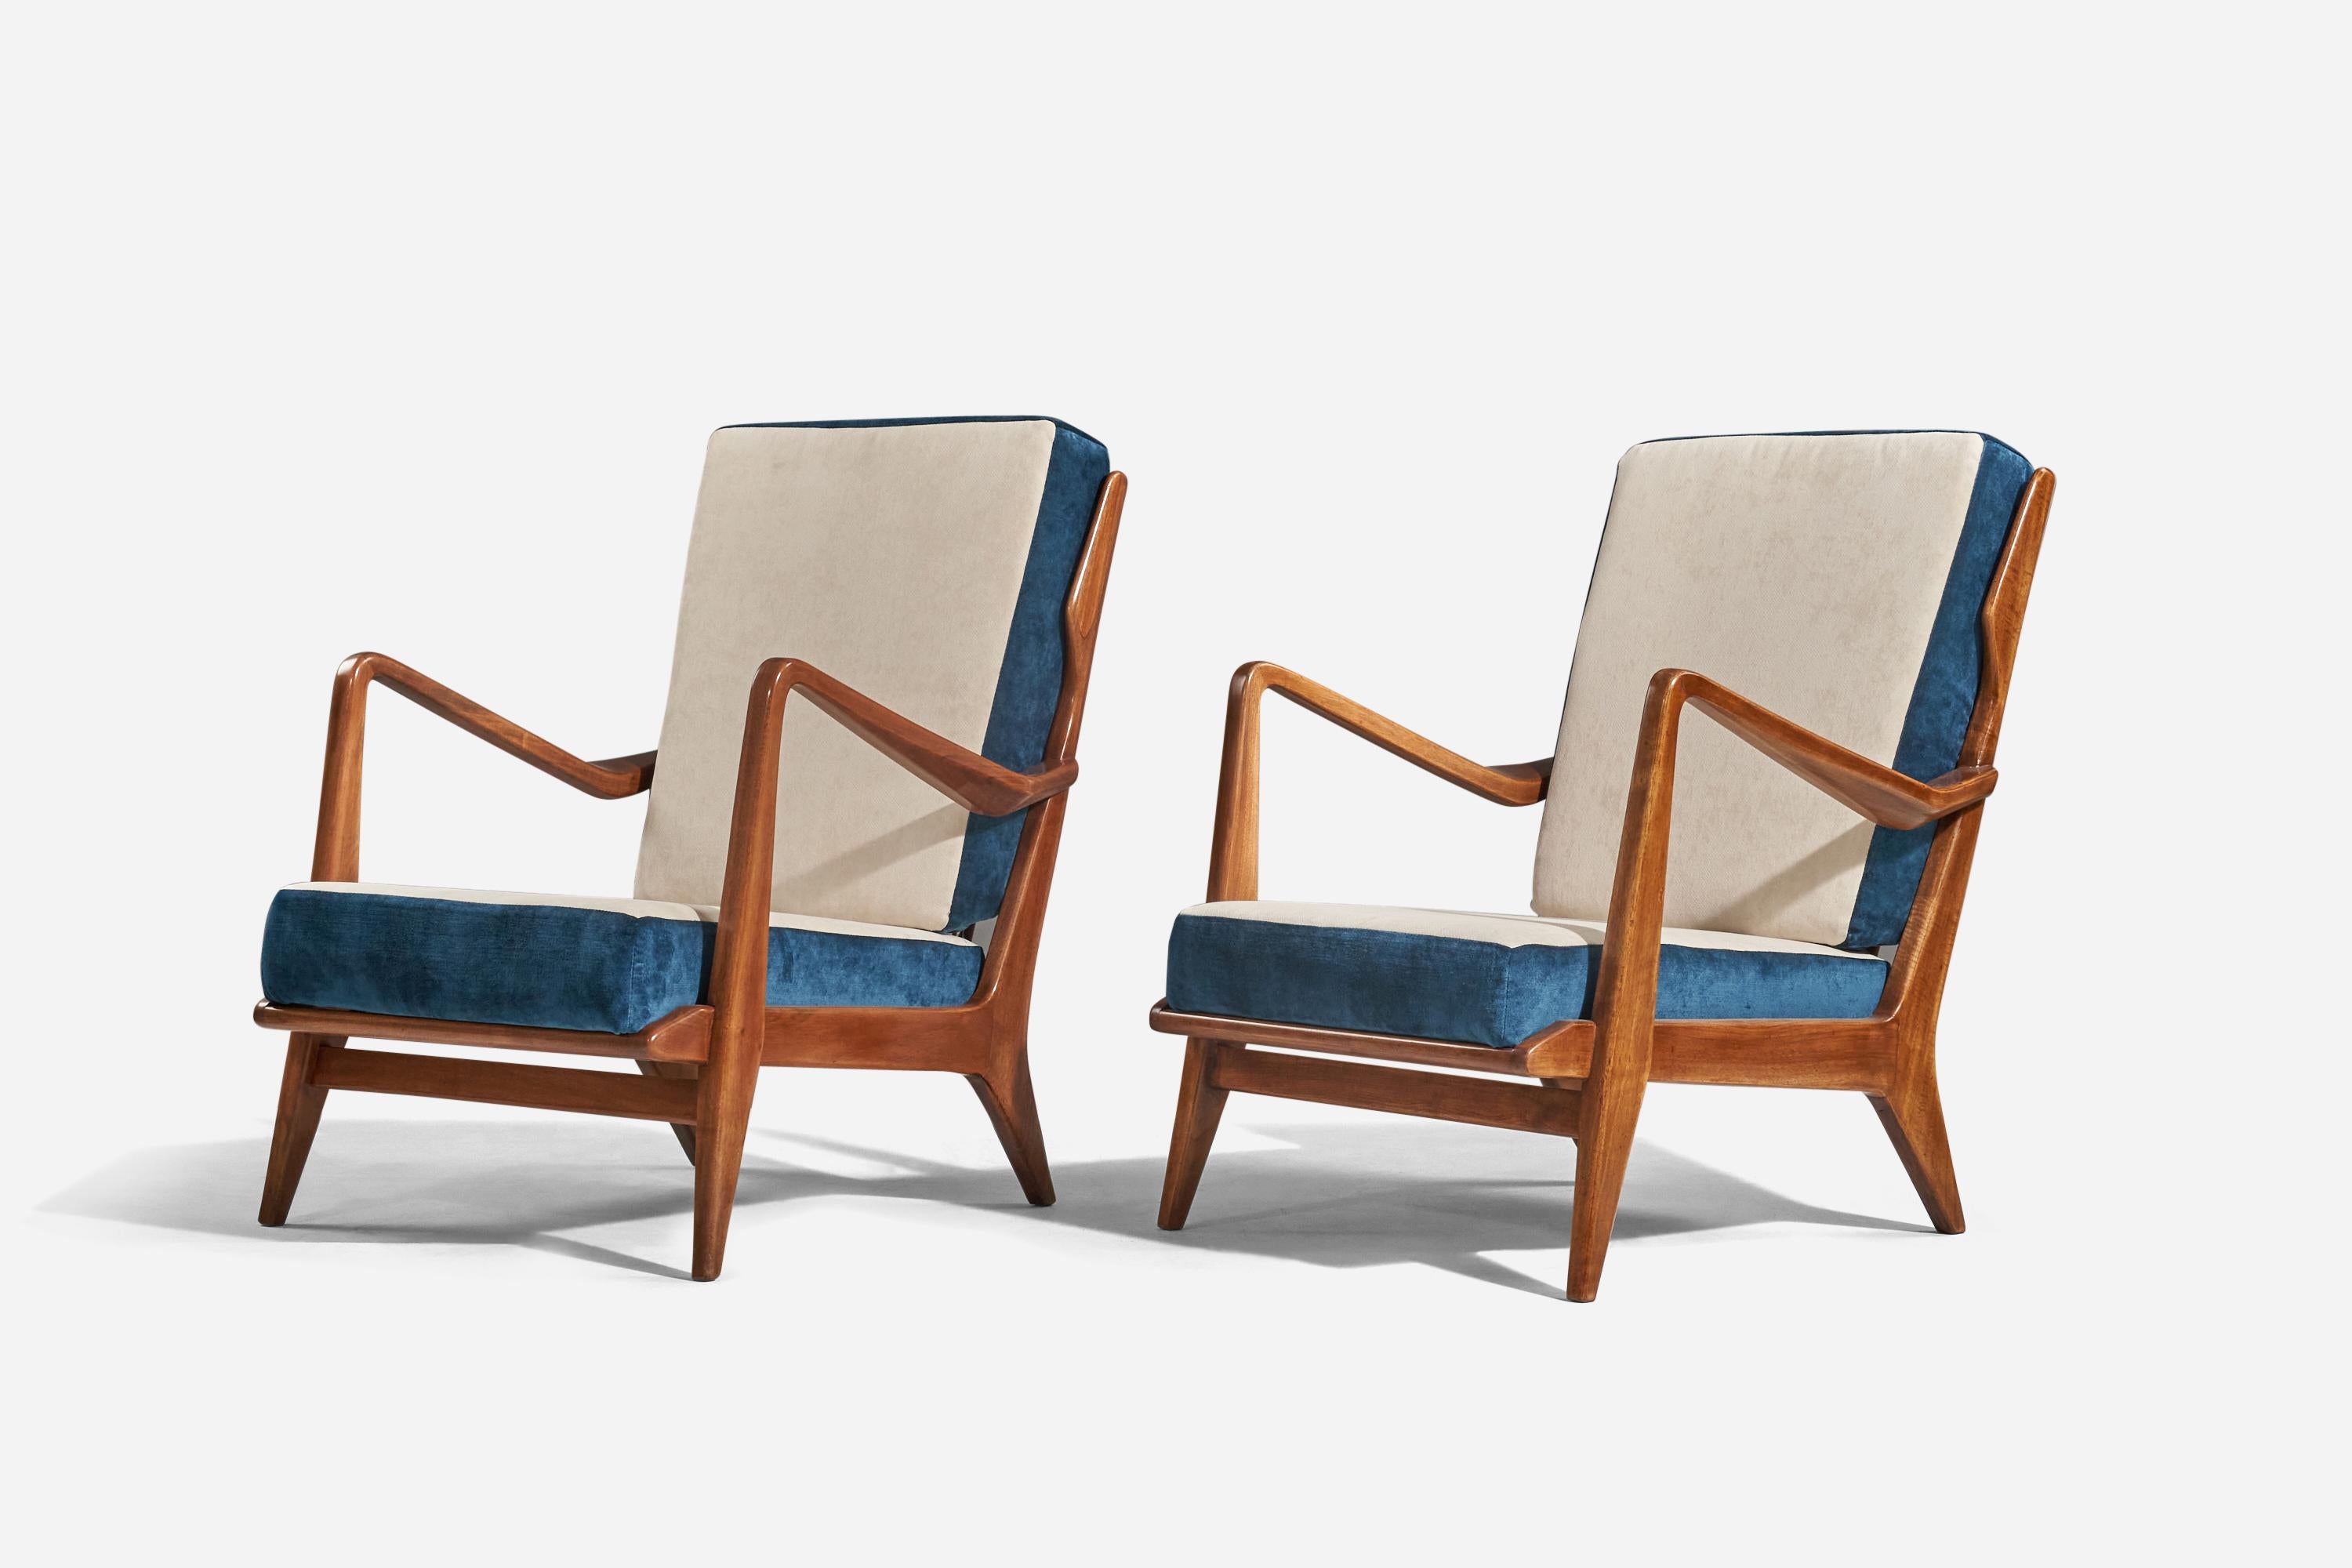 A pair of walnut and blue and white velvet lounge chairs designed by Gio Ponti and produced by Cassina, Italy, 1950s. 

With a certificate of authenticity from the Gio Ponti archives.